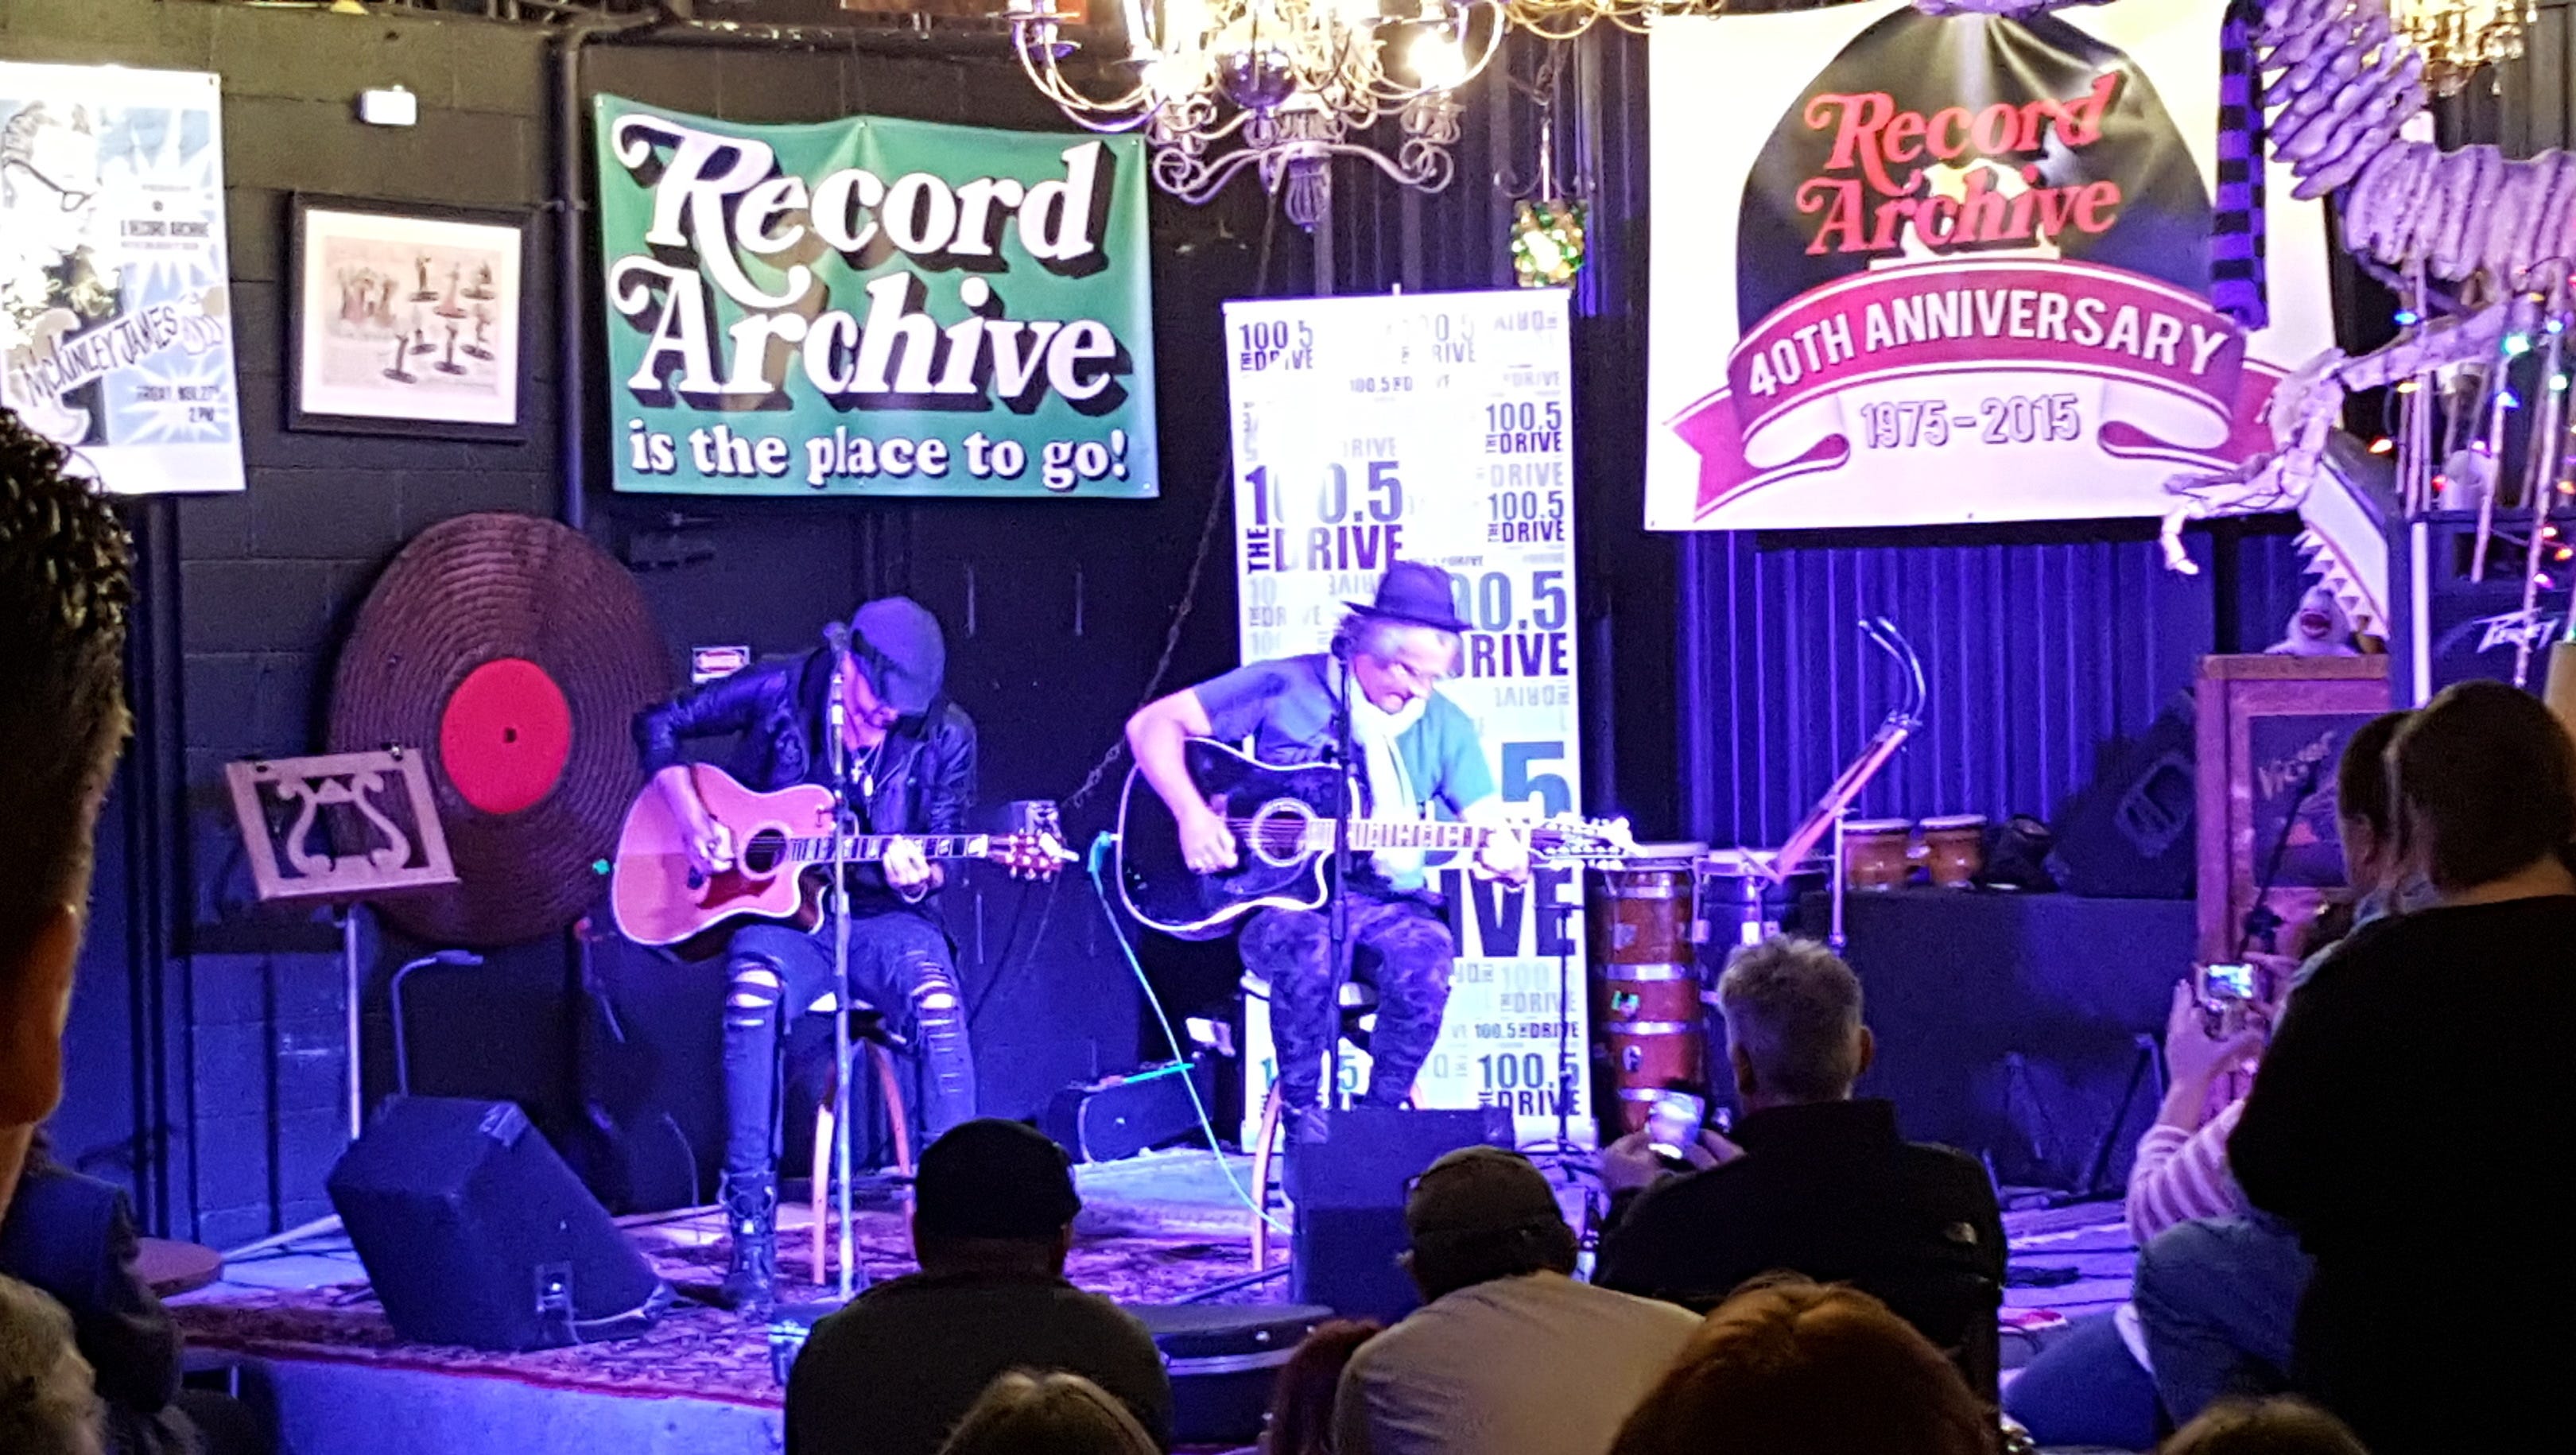 Collective Soul singer stops at Record Archive Saturday